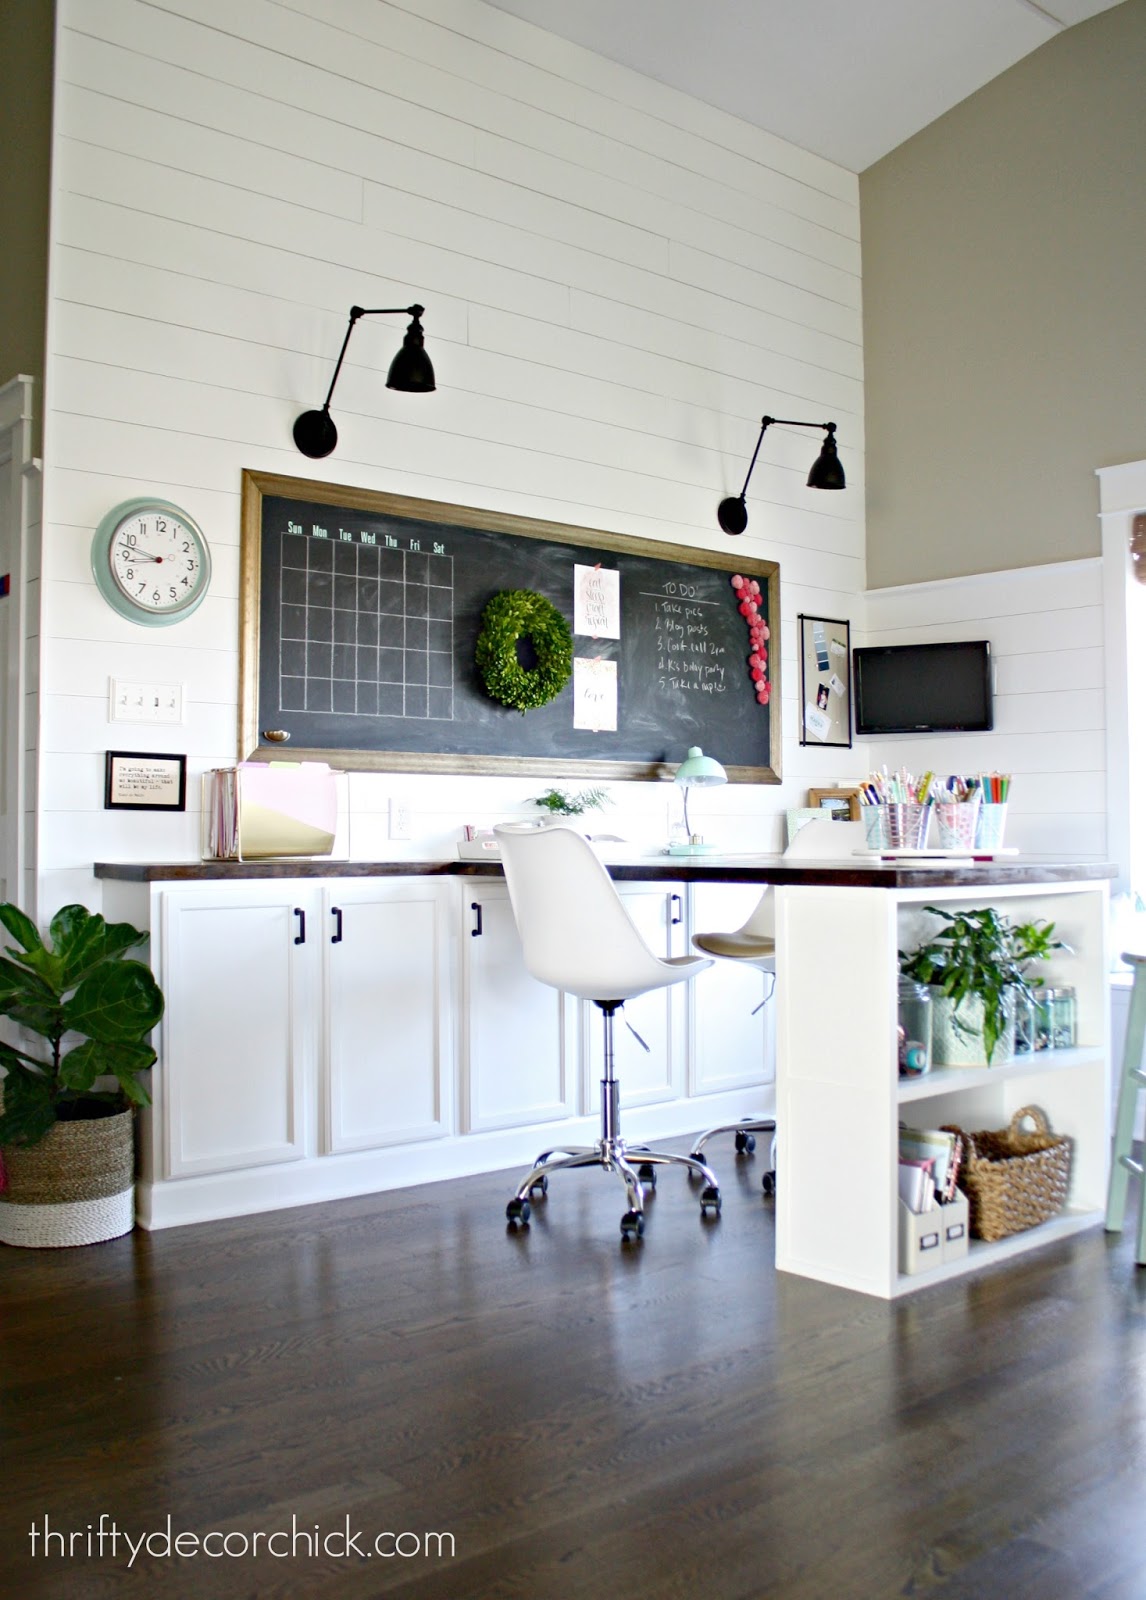 Craft Room/Office Loft Reveal With Built in Desk | Thrifty Decor Chick